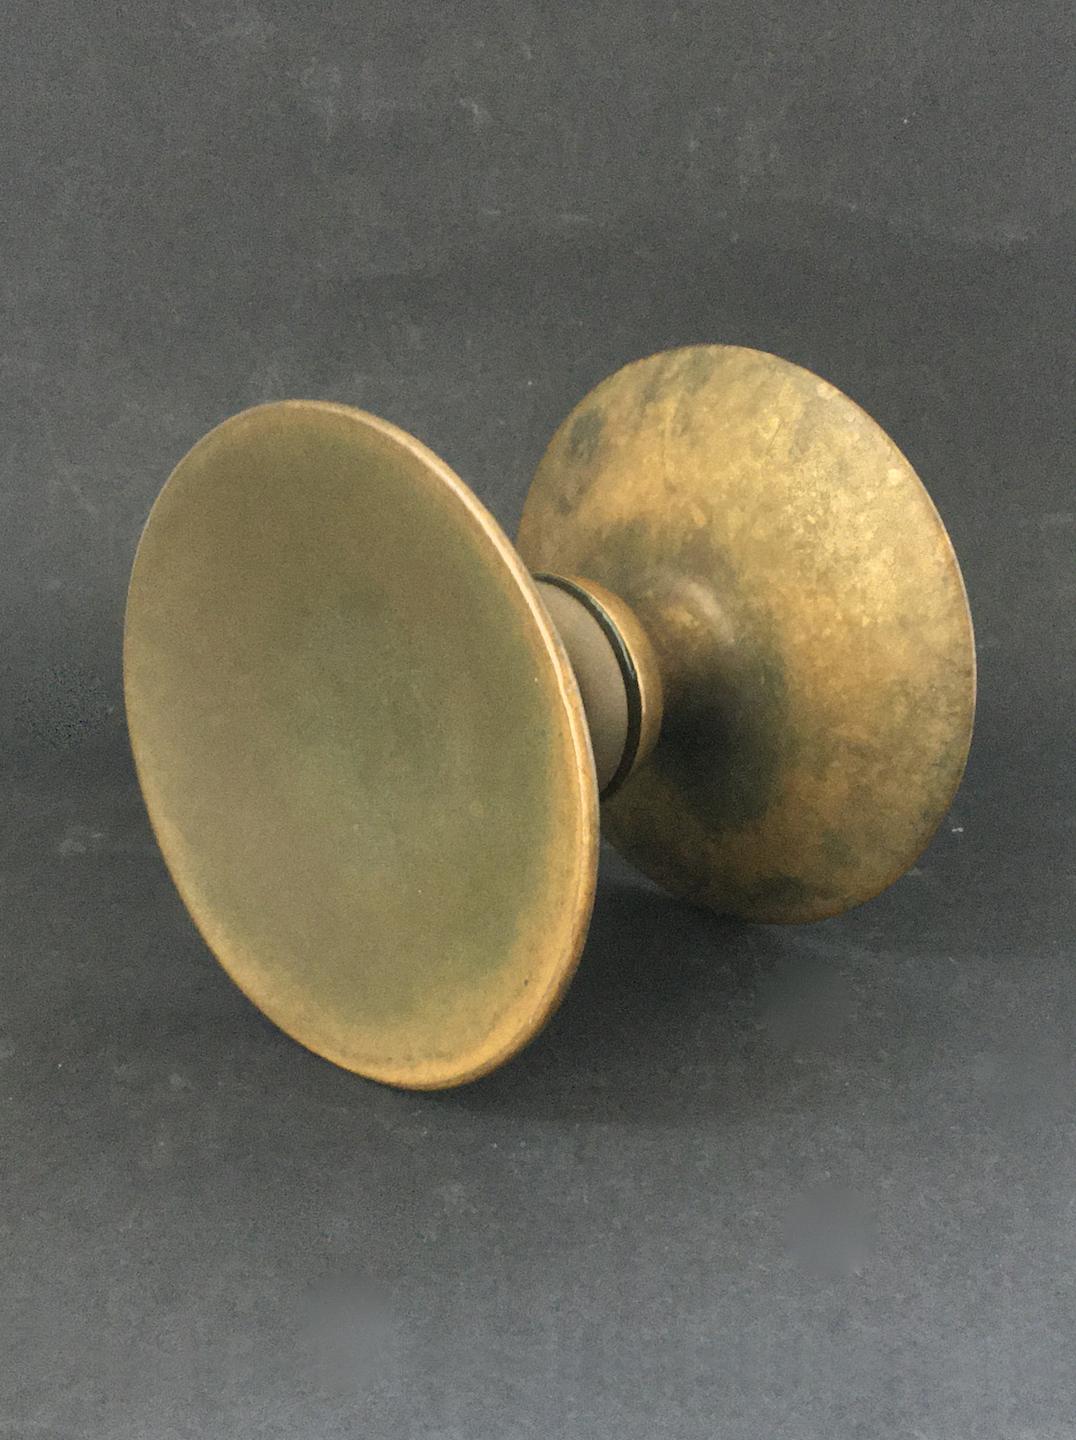 Circular push-pull door handle in bronze, mid-20th century, France.

A very simple elegant handle, made up of two separate round pieces; each side with a slightly concave dish and wide stem. The components are in good vintage condition with an